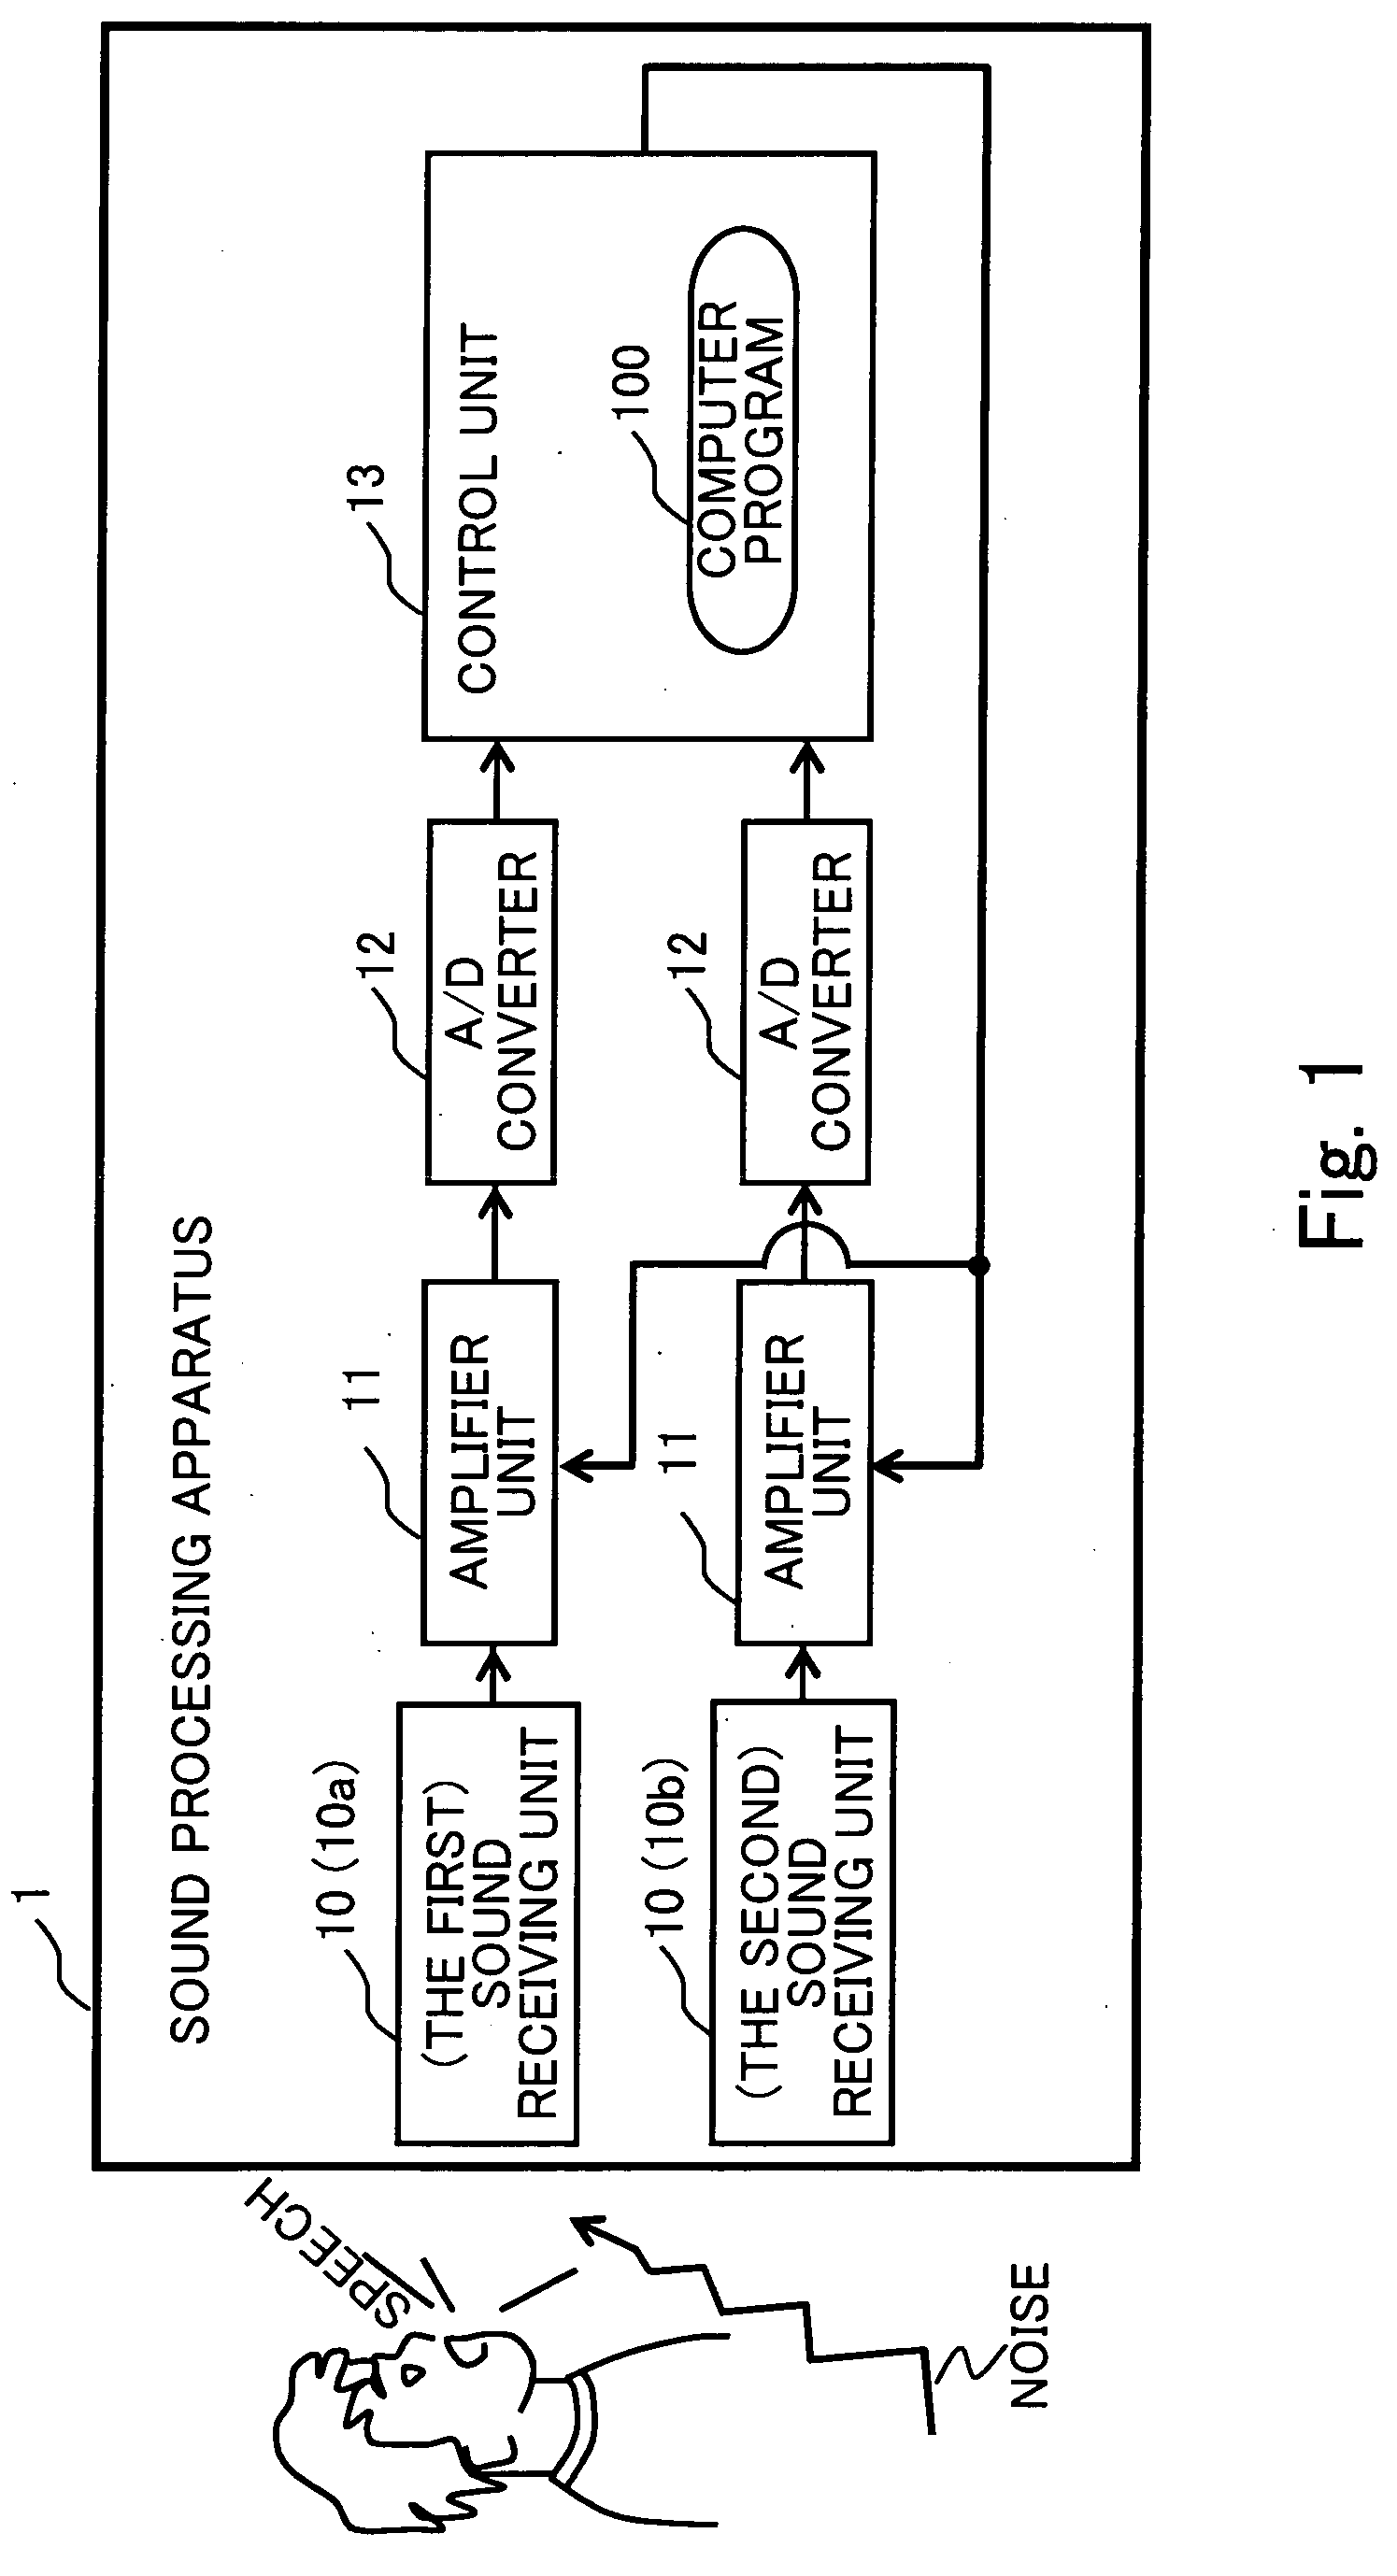 Sound processing apparatus, apparatus and method for cotrolling gain, and computer program